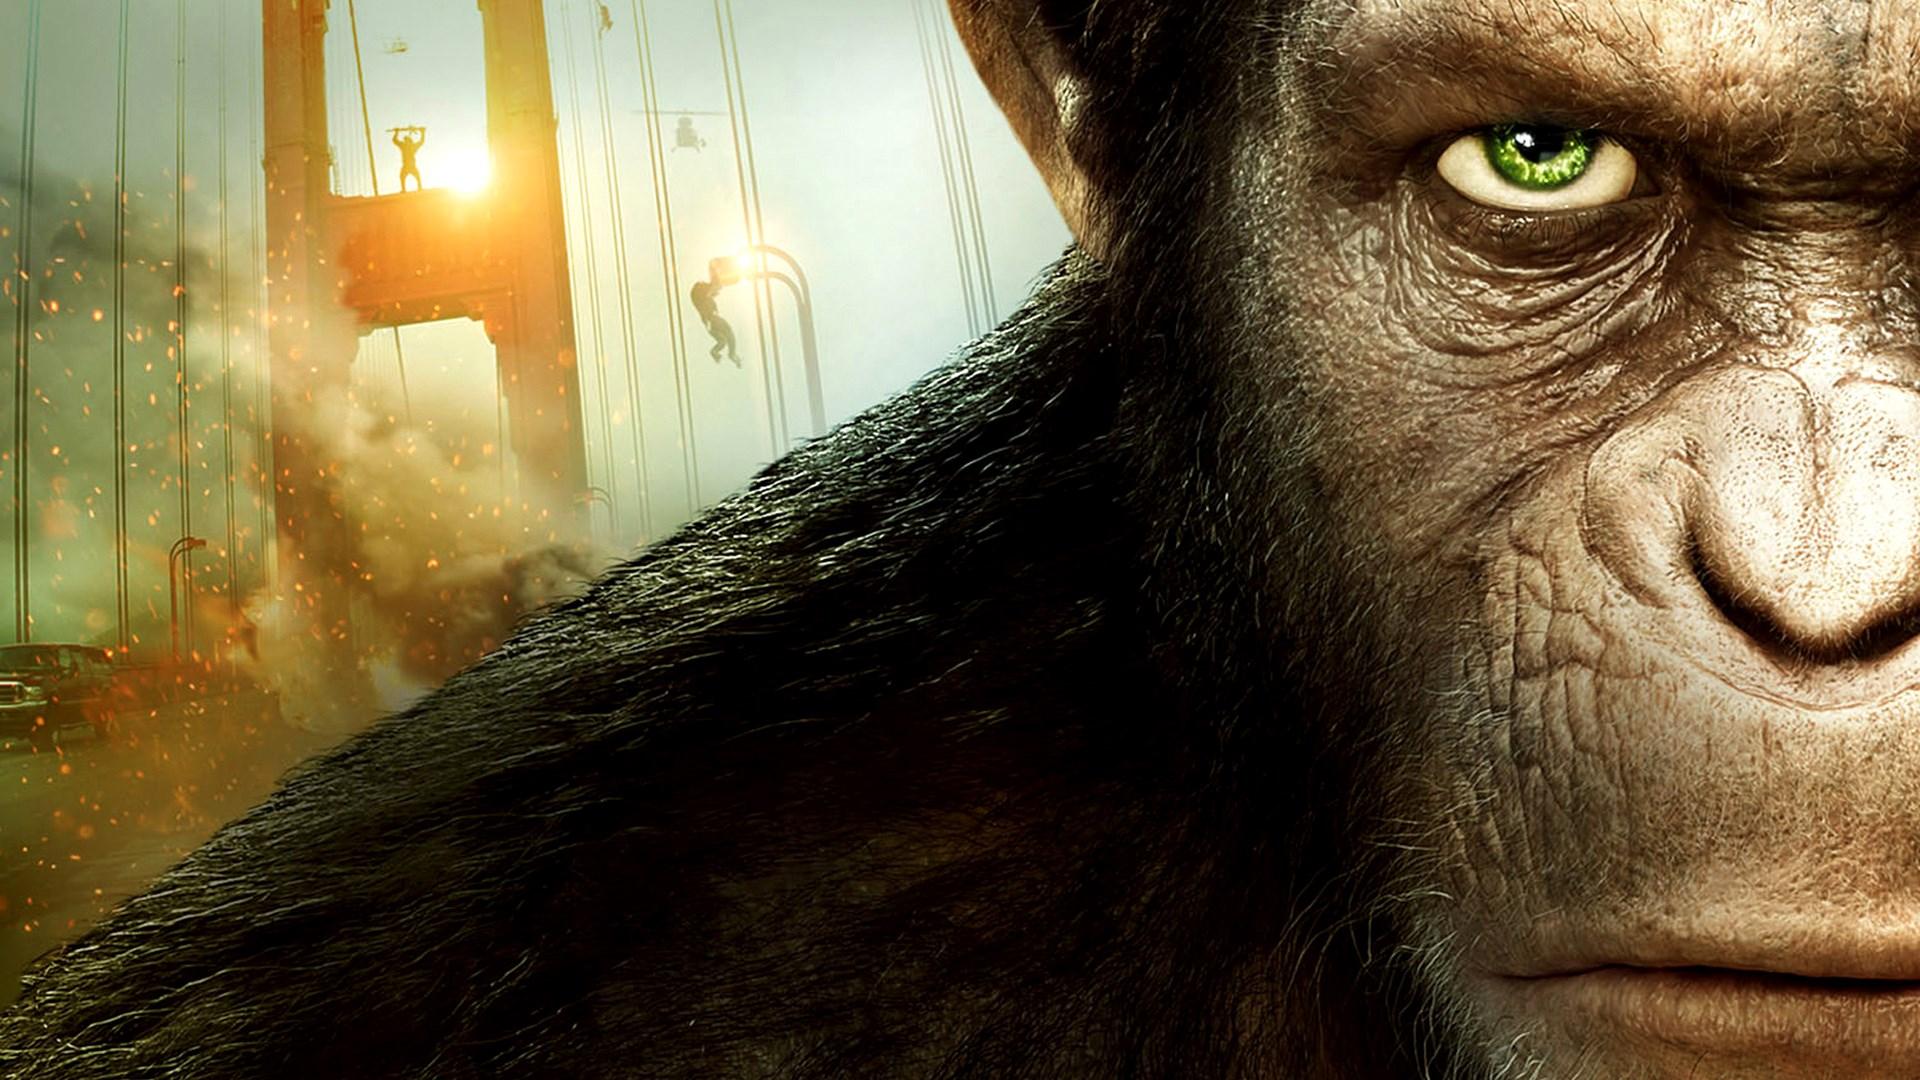 1920x1080 widescreen hd dawn of the planet of the apes JPG.